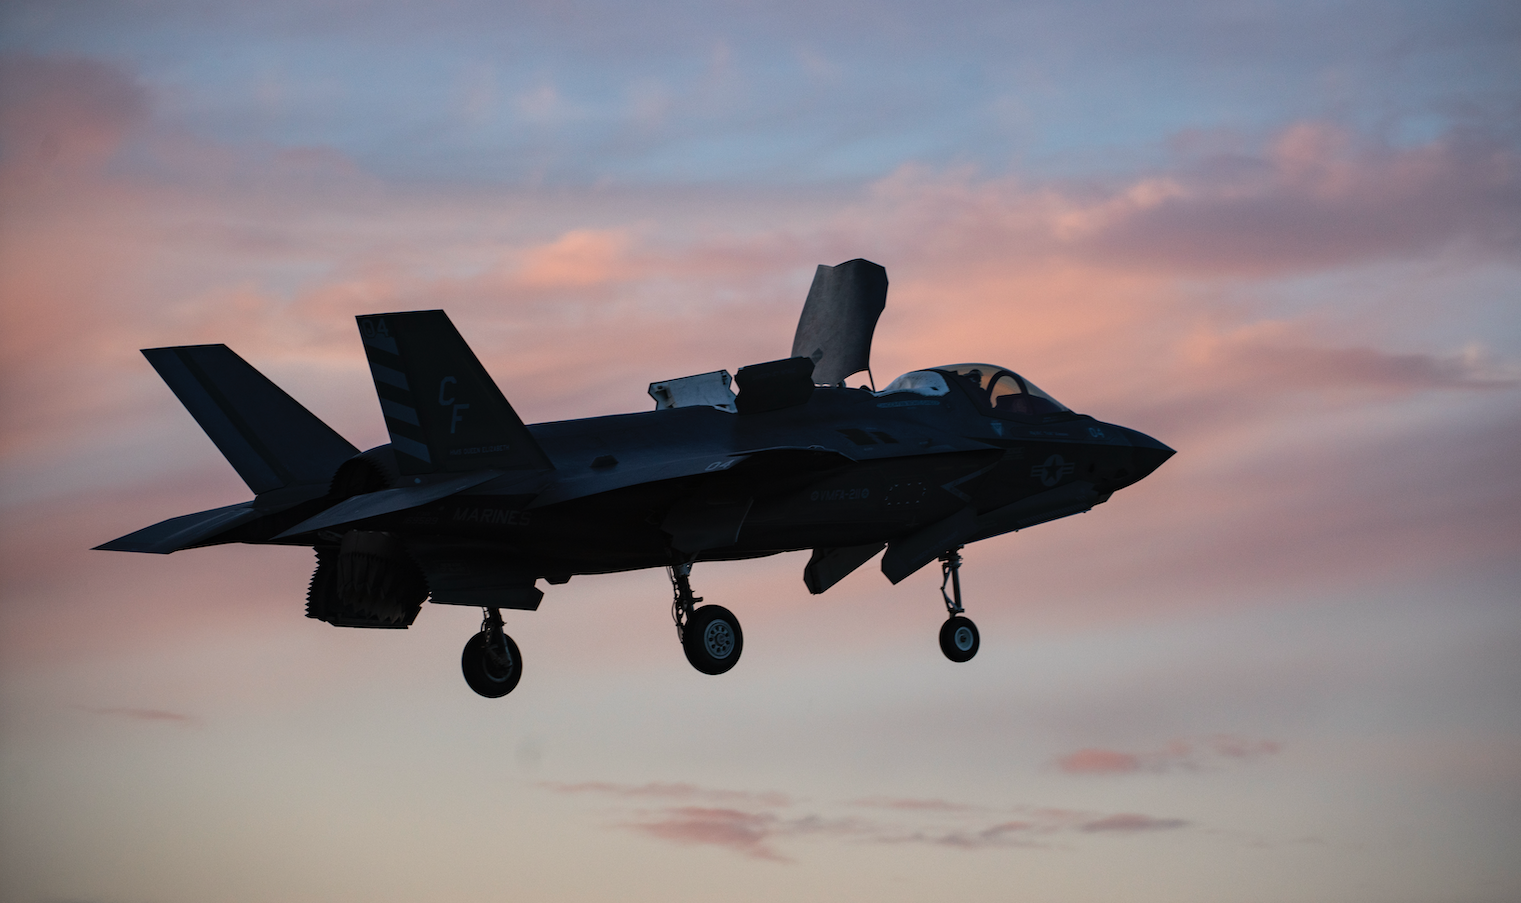 Blended U S Marine U K Royal Air Force Air Wing Aboard Hms Queen Elizabeth Will Be Largest F 35 Deployment To Date Usni News